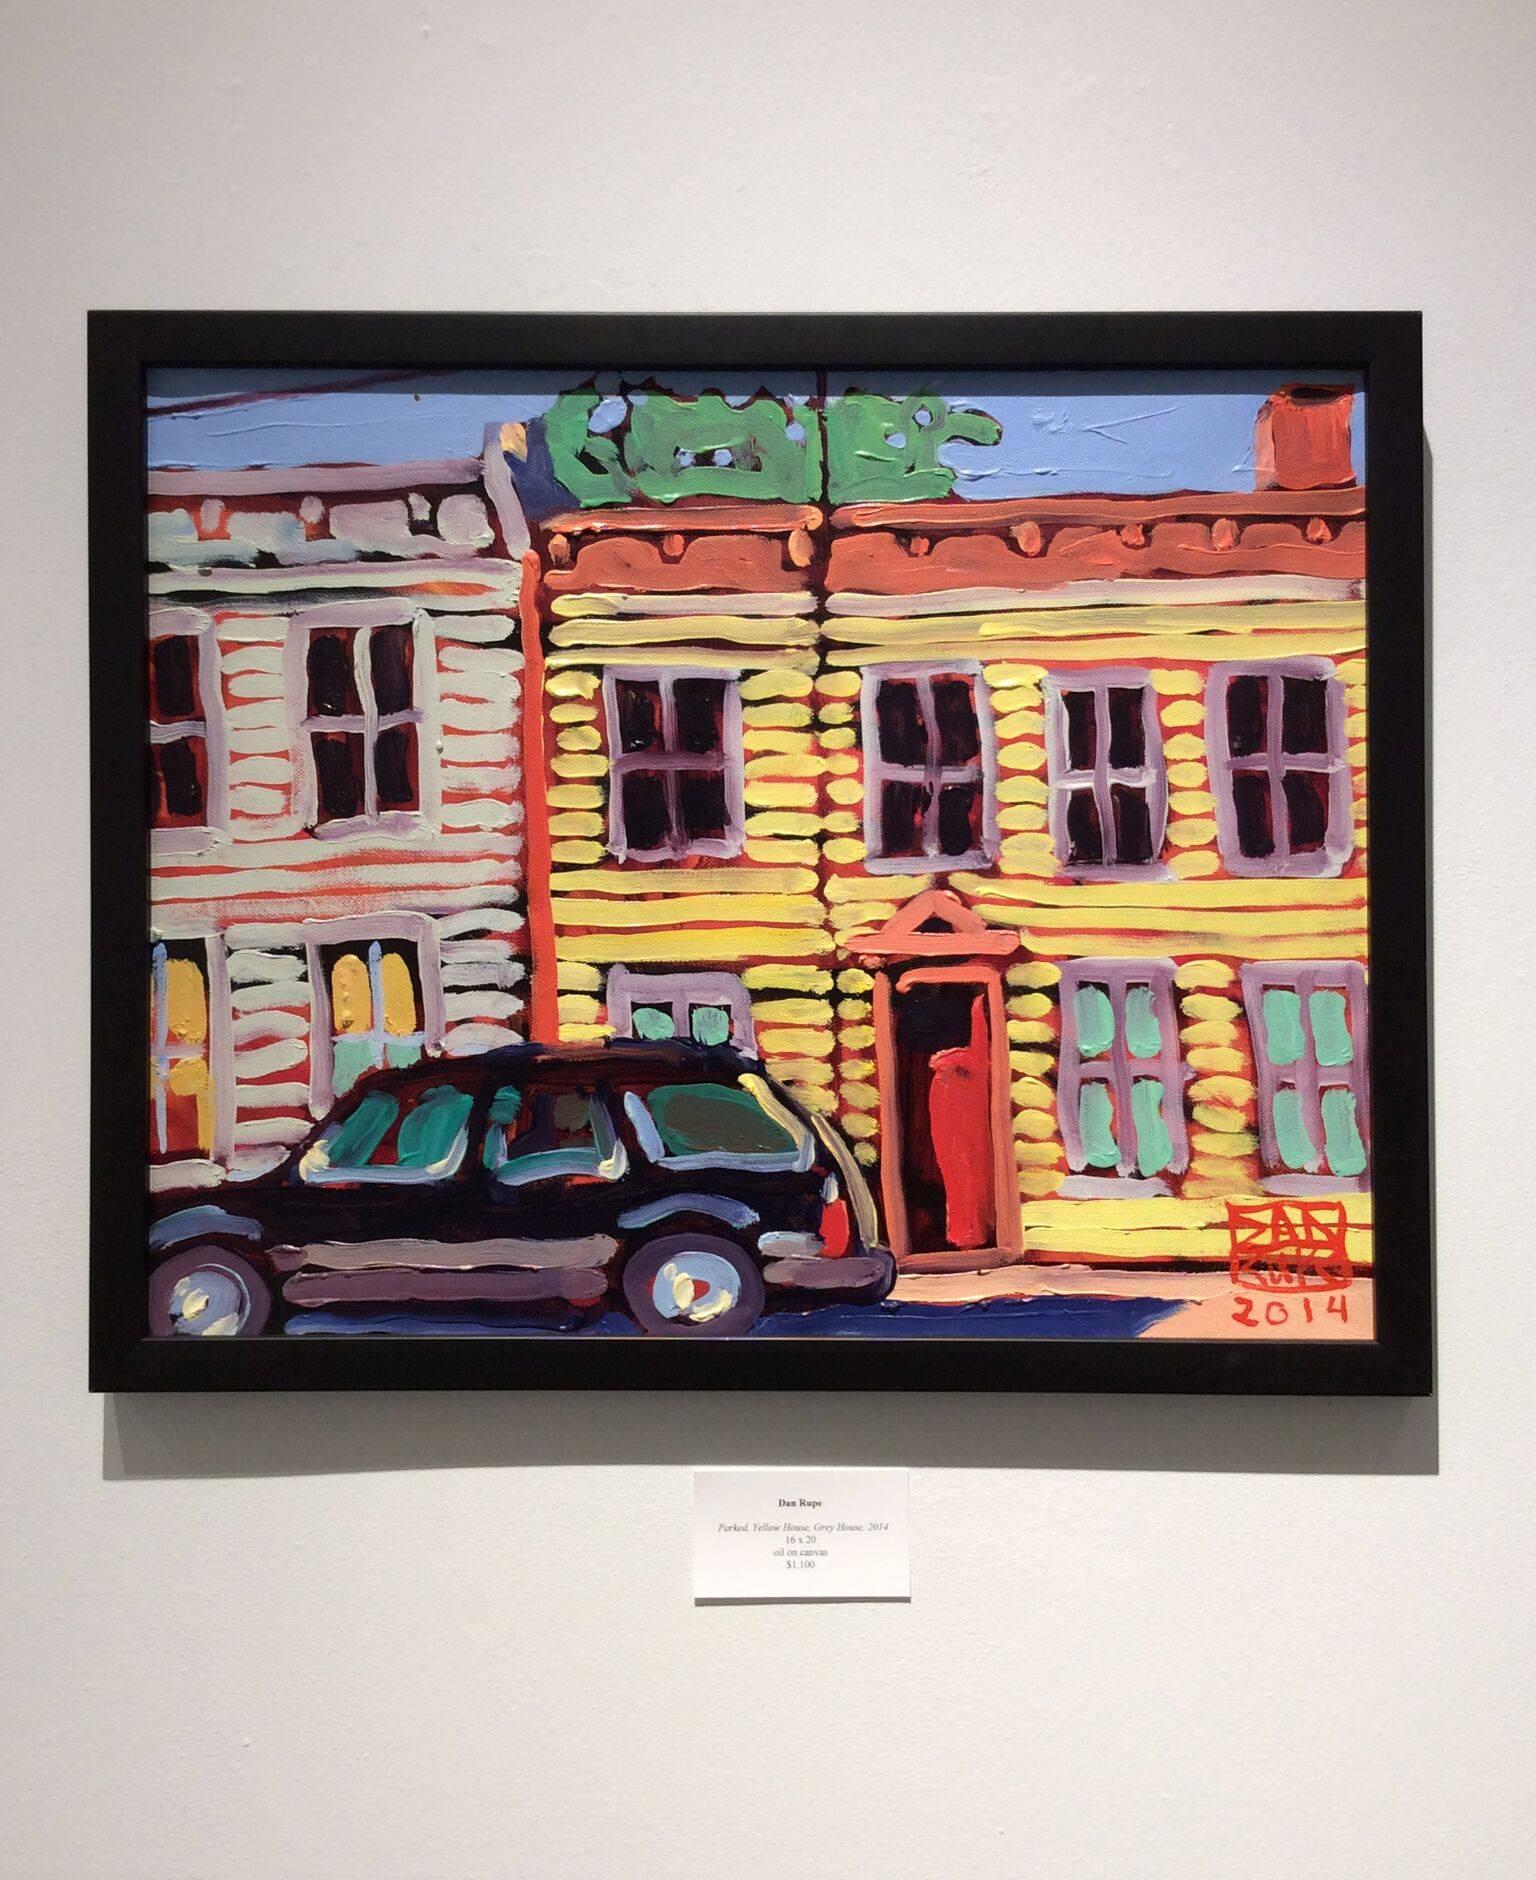 Colorful, Fauvist style cityscape painting of Hudson, NY townhouses in bright yellow and grey.
16 x 20 inches
oil on canvas, framed in a simple black moulding

This modern, Fauvist-style cityscape painting by Dan Rupe captures the streets of Hudson,